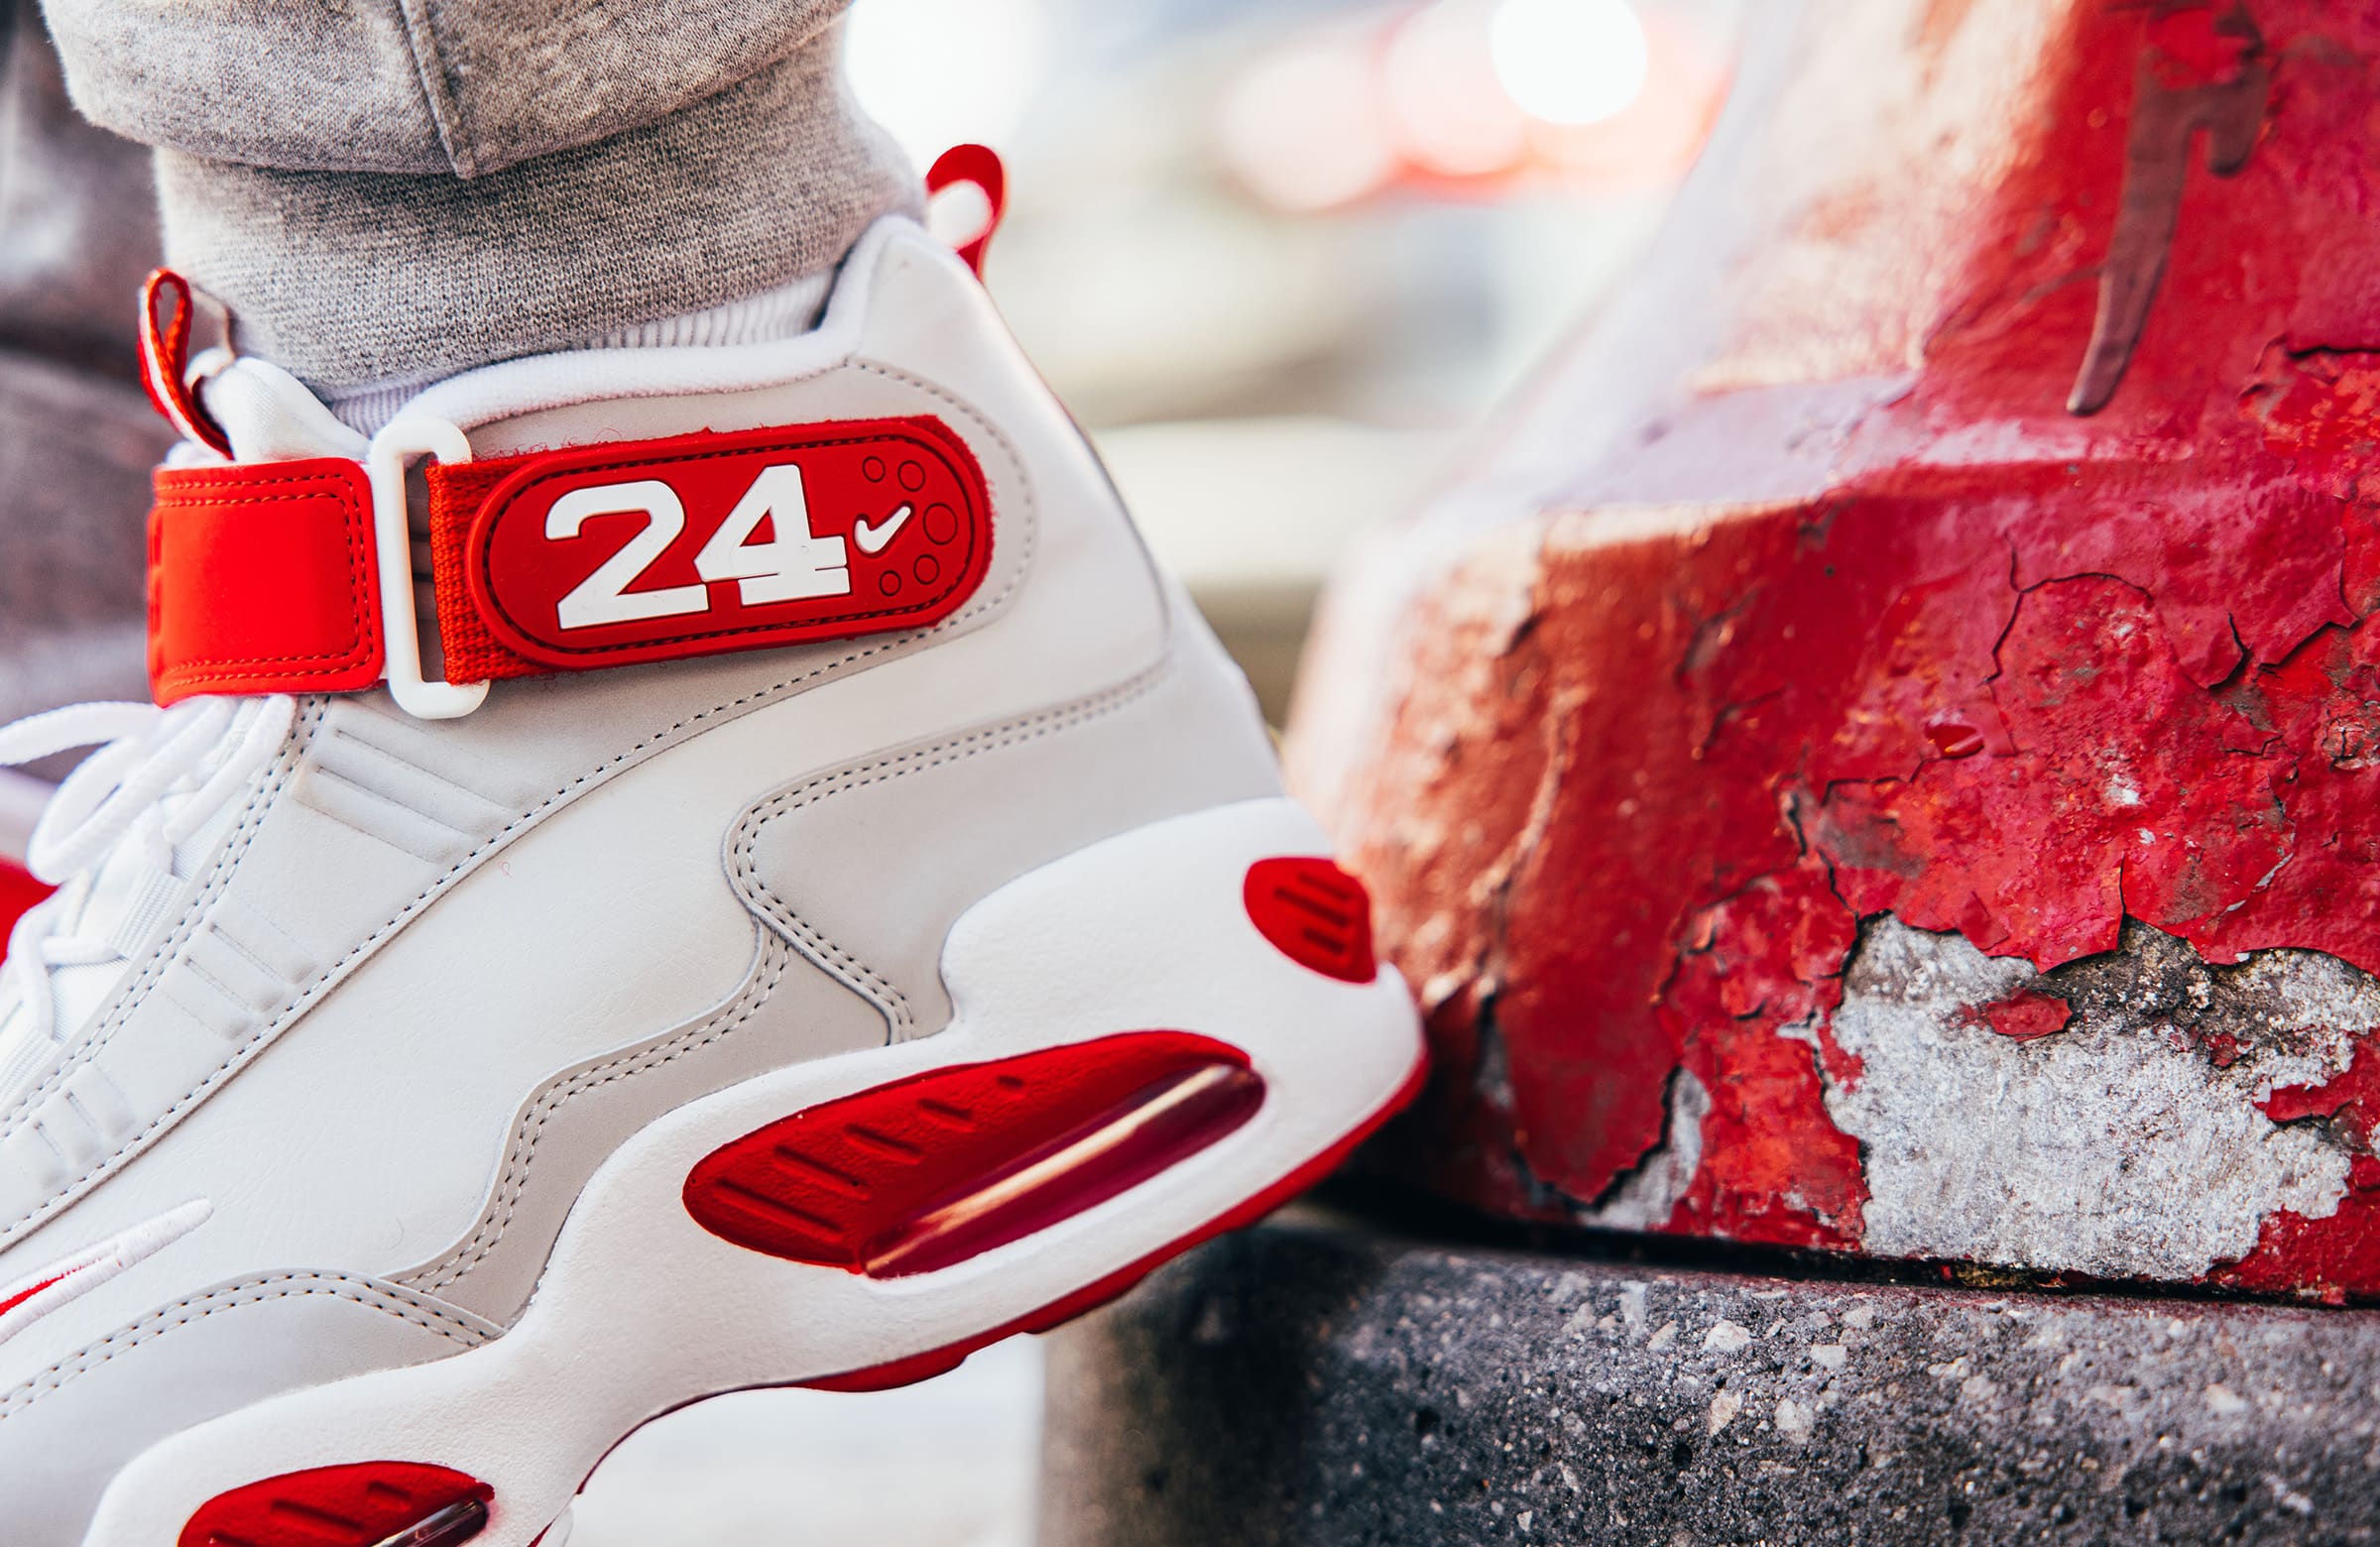 This Nike Air Griffey Max 1 Plays for the Cincinnati Reds – DTLR